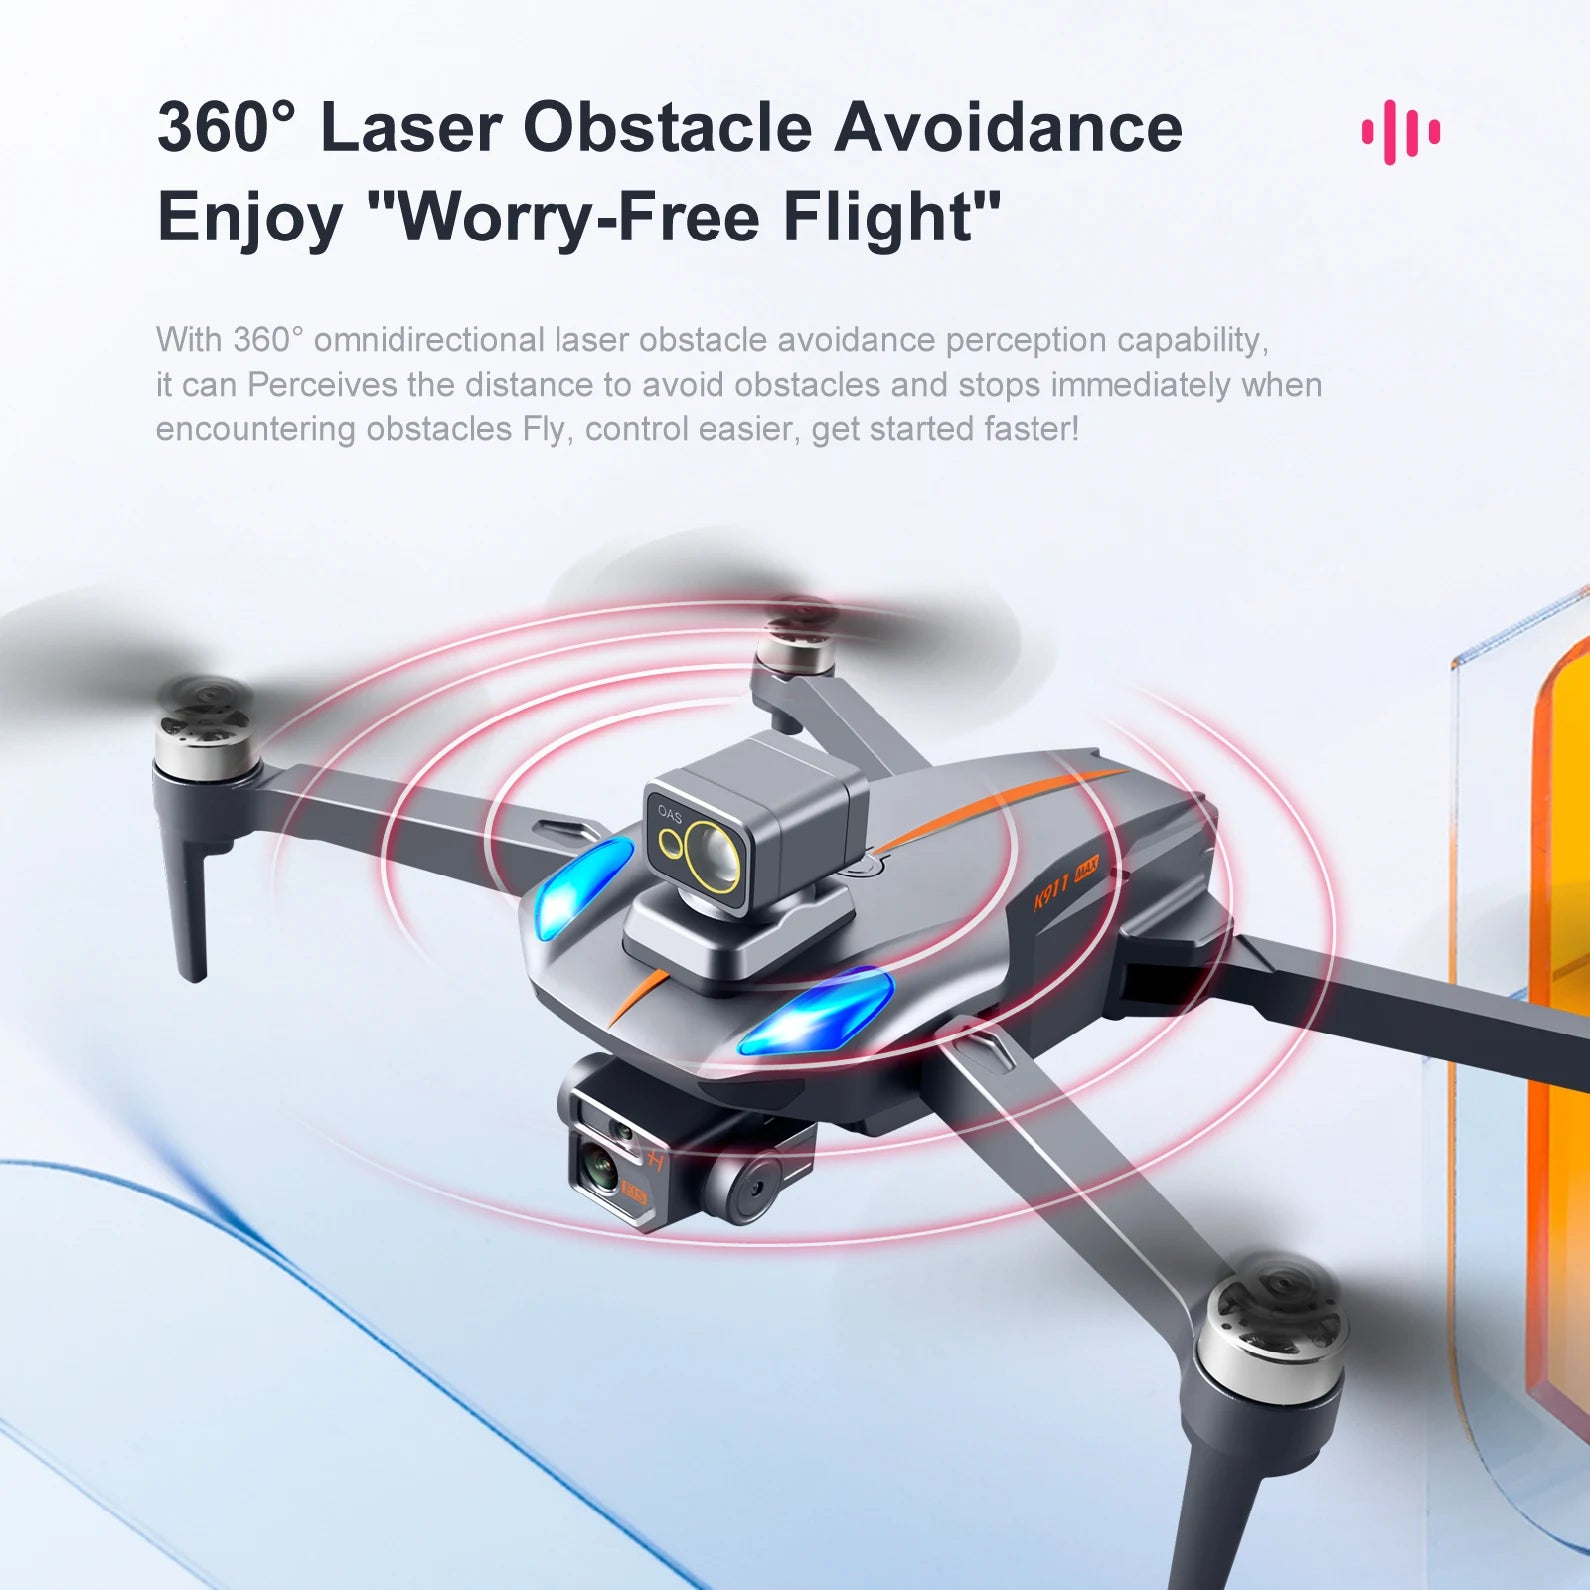 3600 omnidirectional laser obstacle avoidance perception . it can Perceive the distance